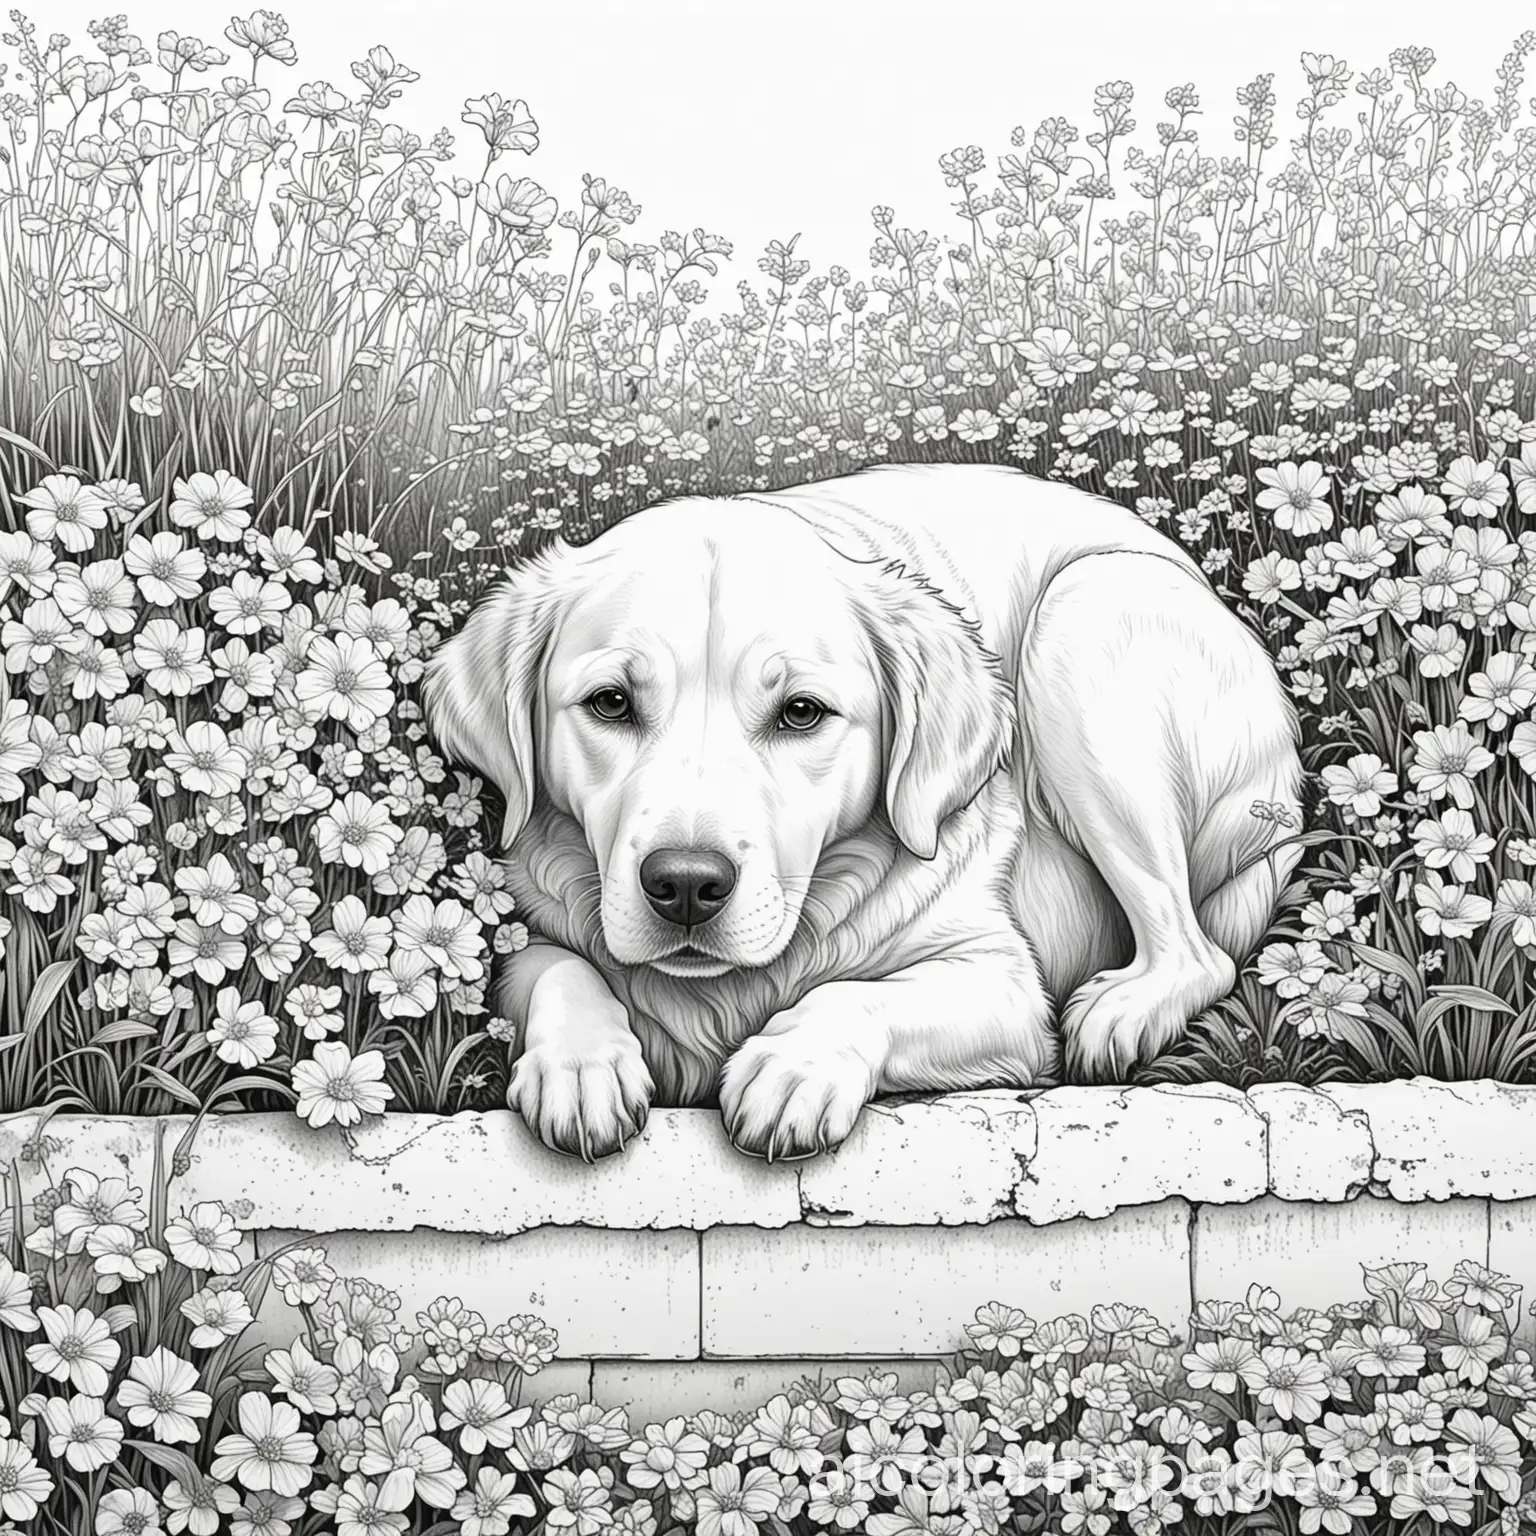 A dog laying in flower bed., Coloring Page, black and white, line art, white background, Simplicity, Ample White Space. The background of the coloring page is plain white to make it easy for young children to color within the lines. The outlines of all the subjects are easy to distinguish, making it simple for kids to color without too much difficulty